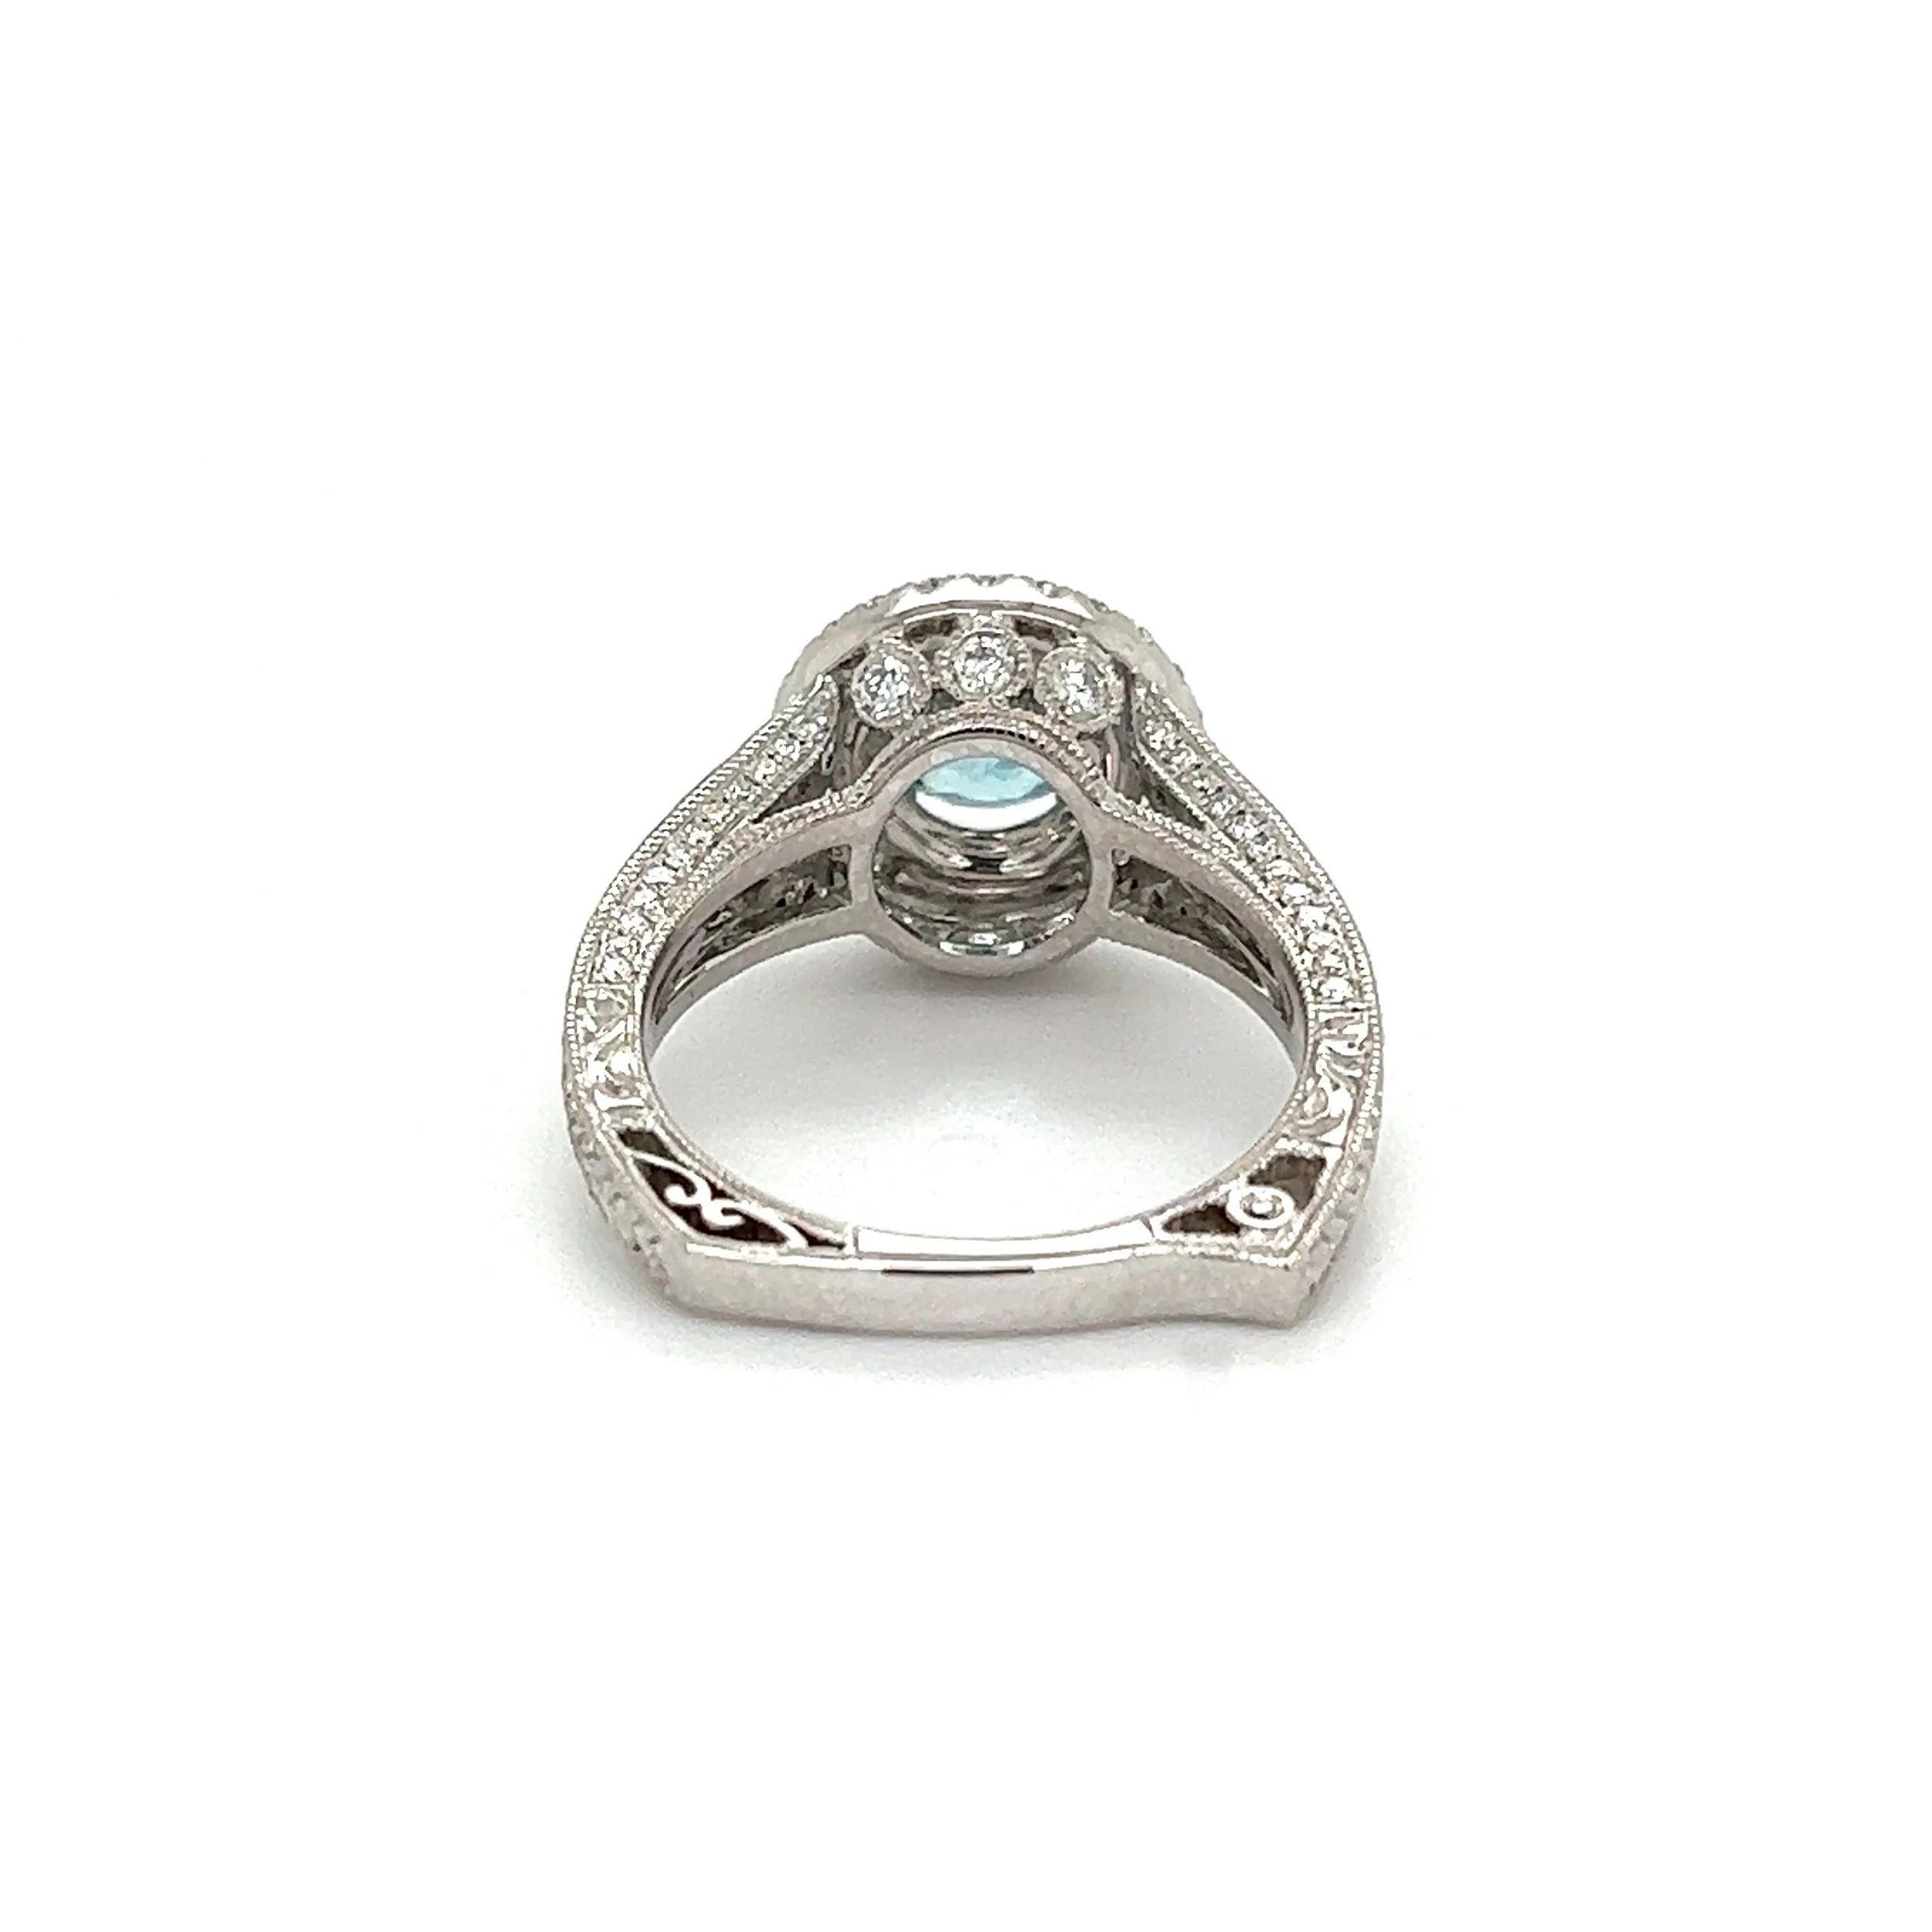 1.33 Carat Blue Zircon Diamond Vintage Gold Cocktail Ring Estate Fine Jewelry In Excellent Condition For Sale In Montreal, QC